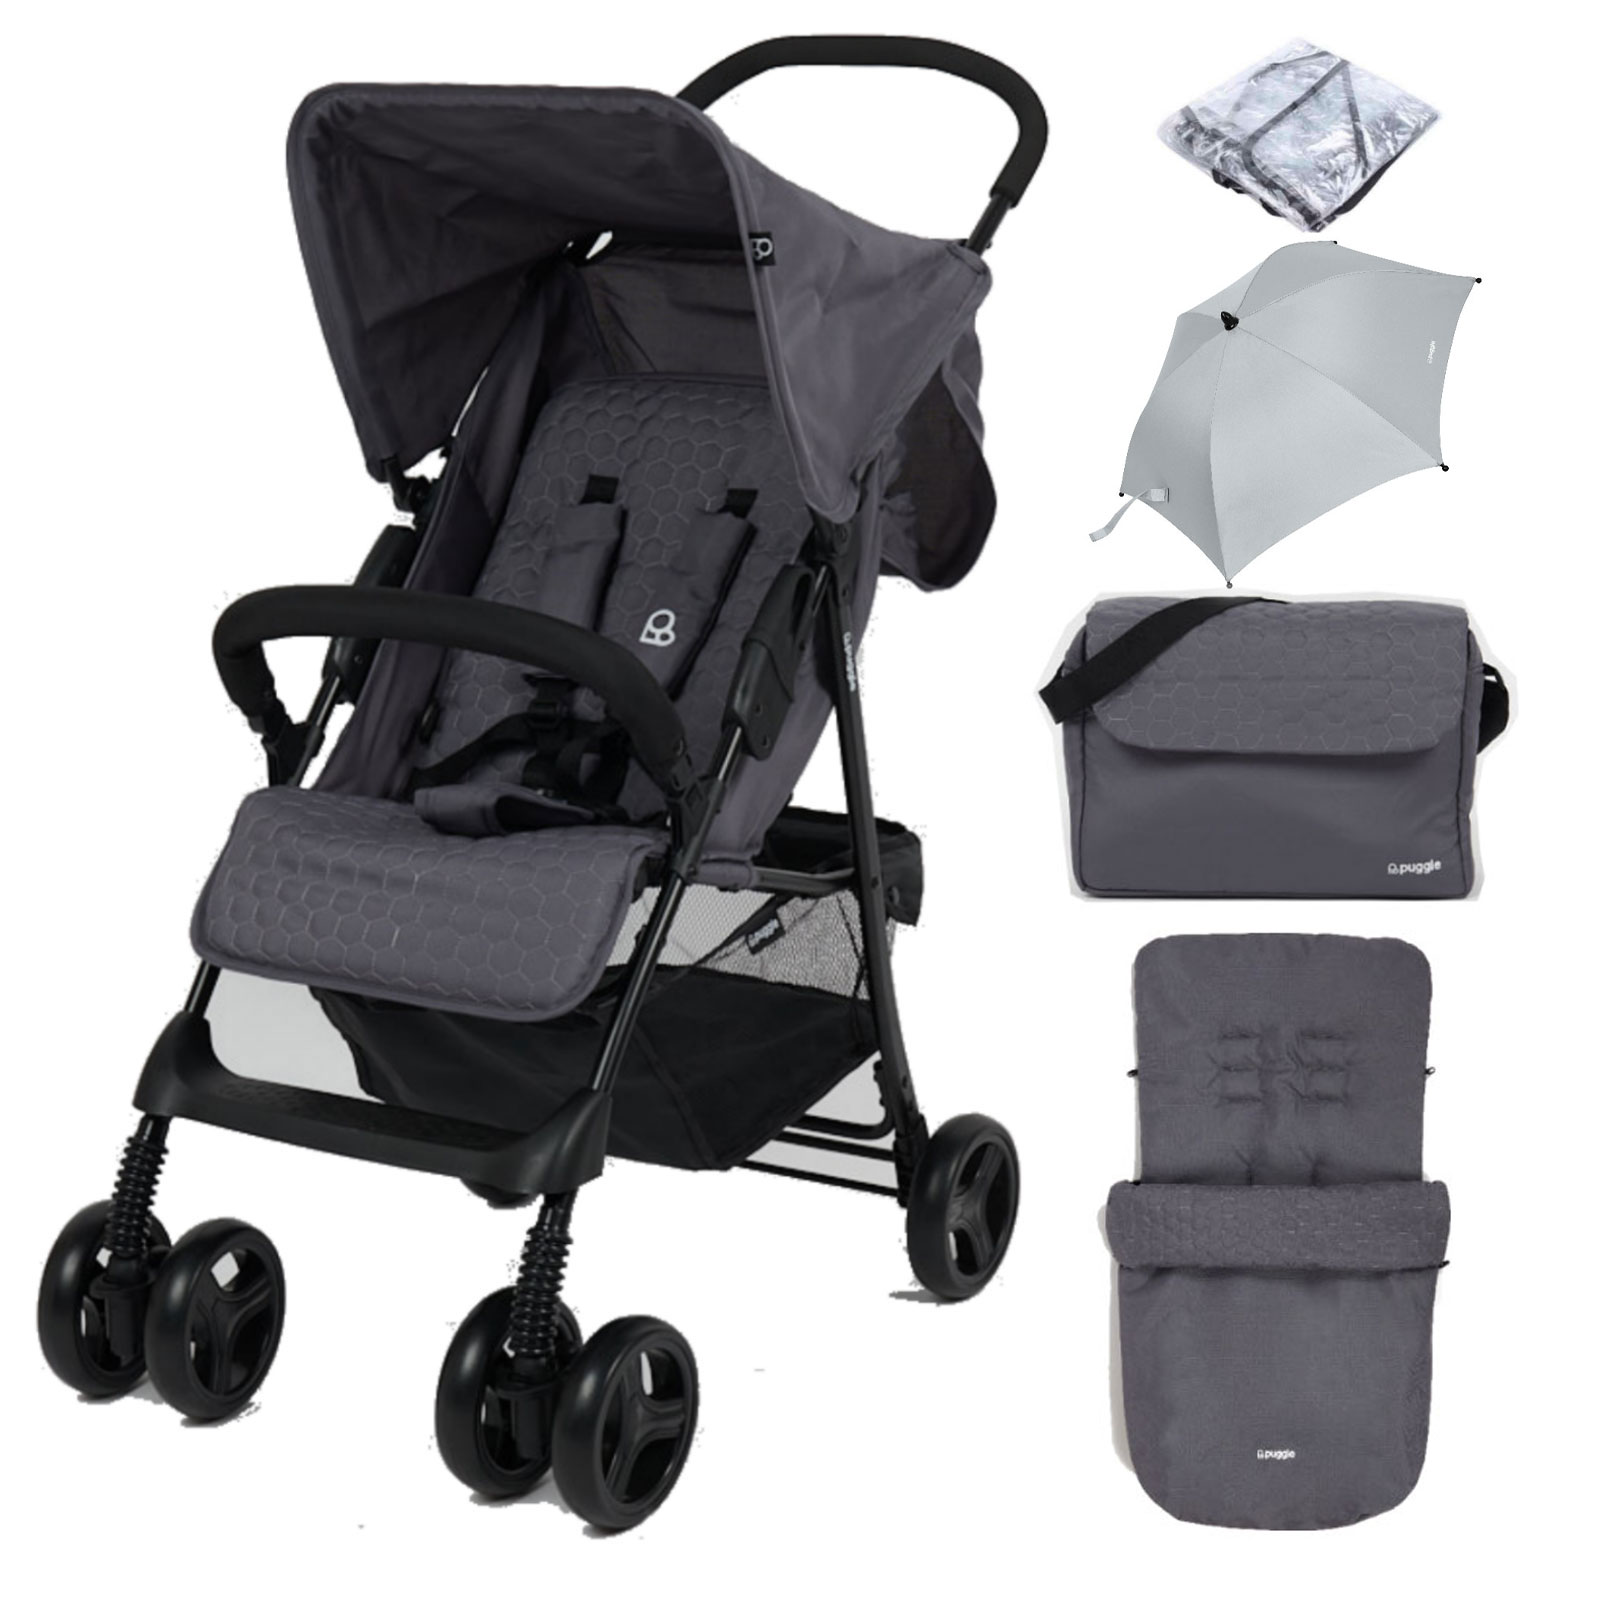 Puggle Holiday Luxe Pushchair Stroller with Raincover, Universal Footmuff, Parasol, Changing Bag and Mat – Slate Grey